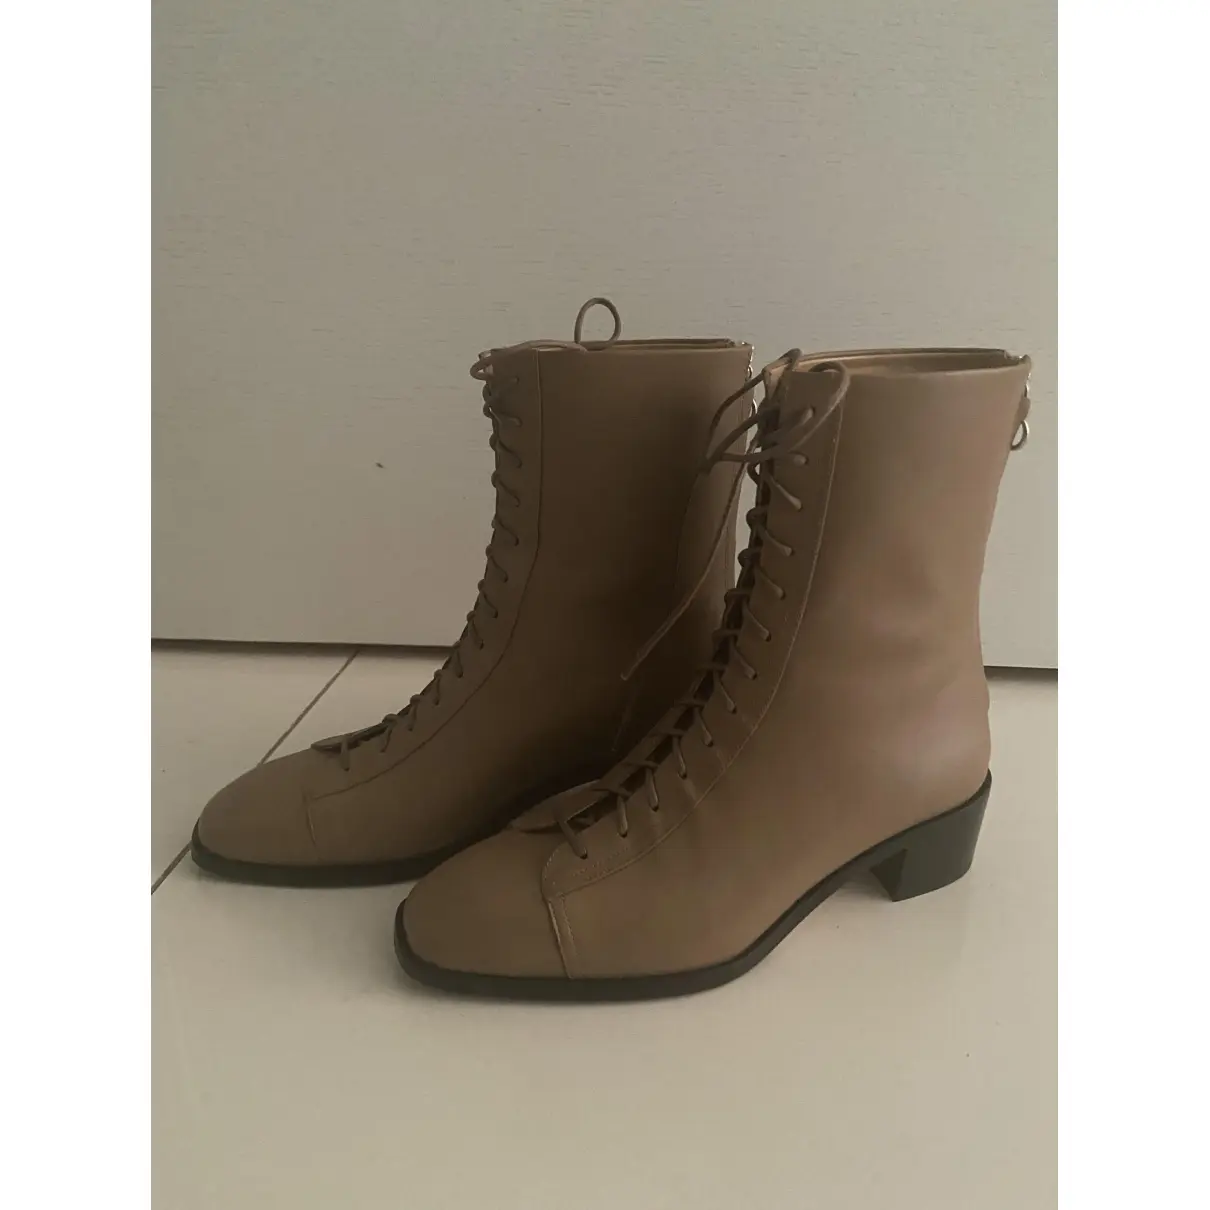 Buy Aeyde Leather ankle boots online